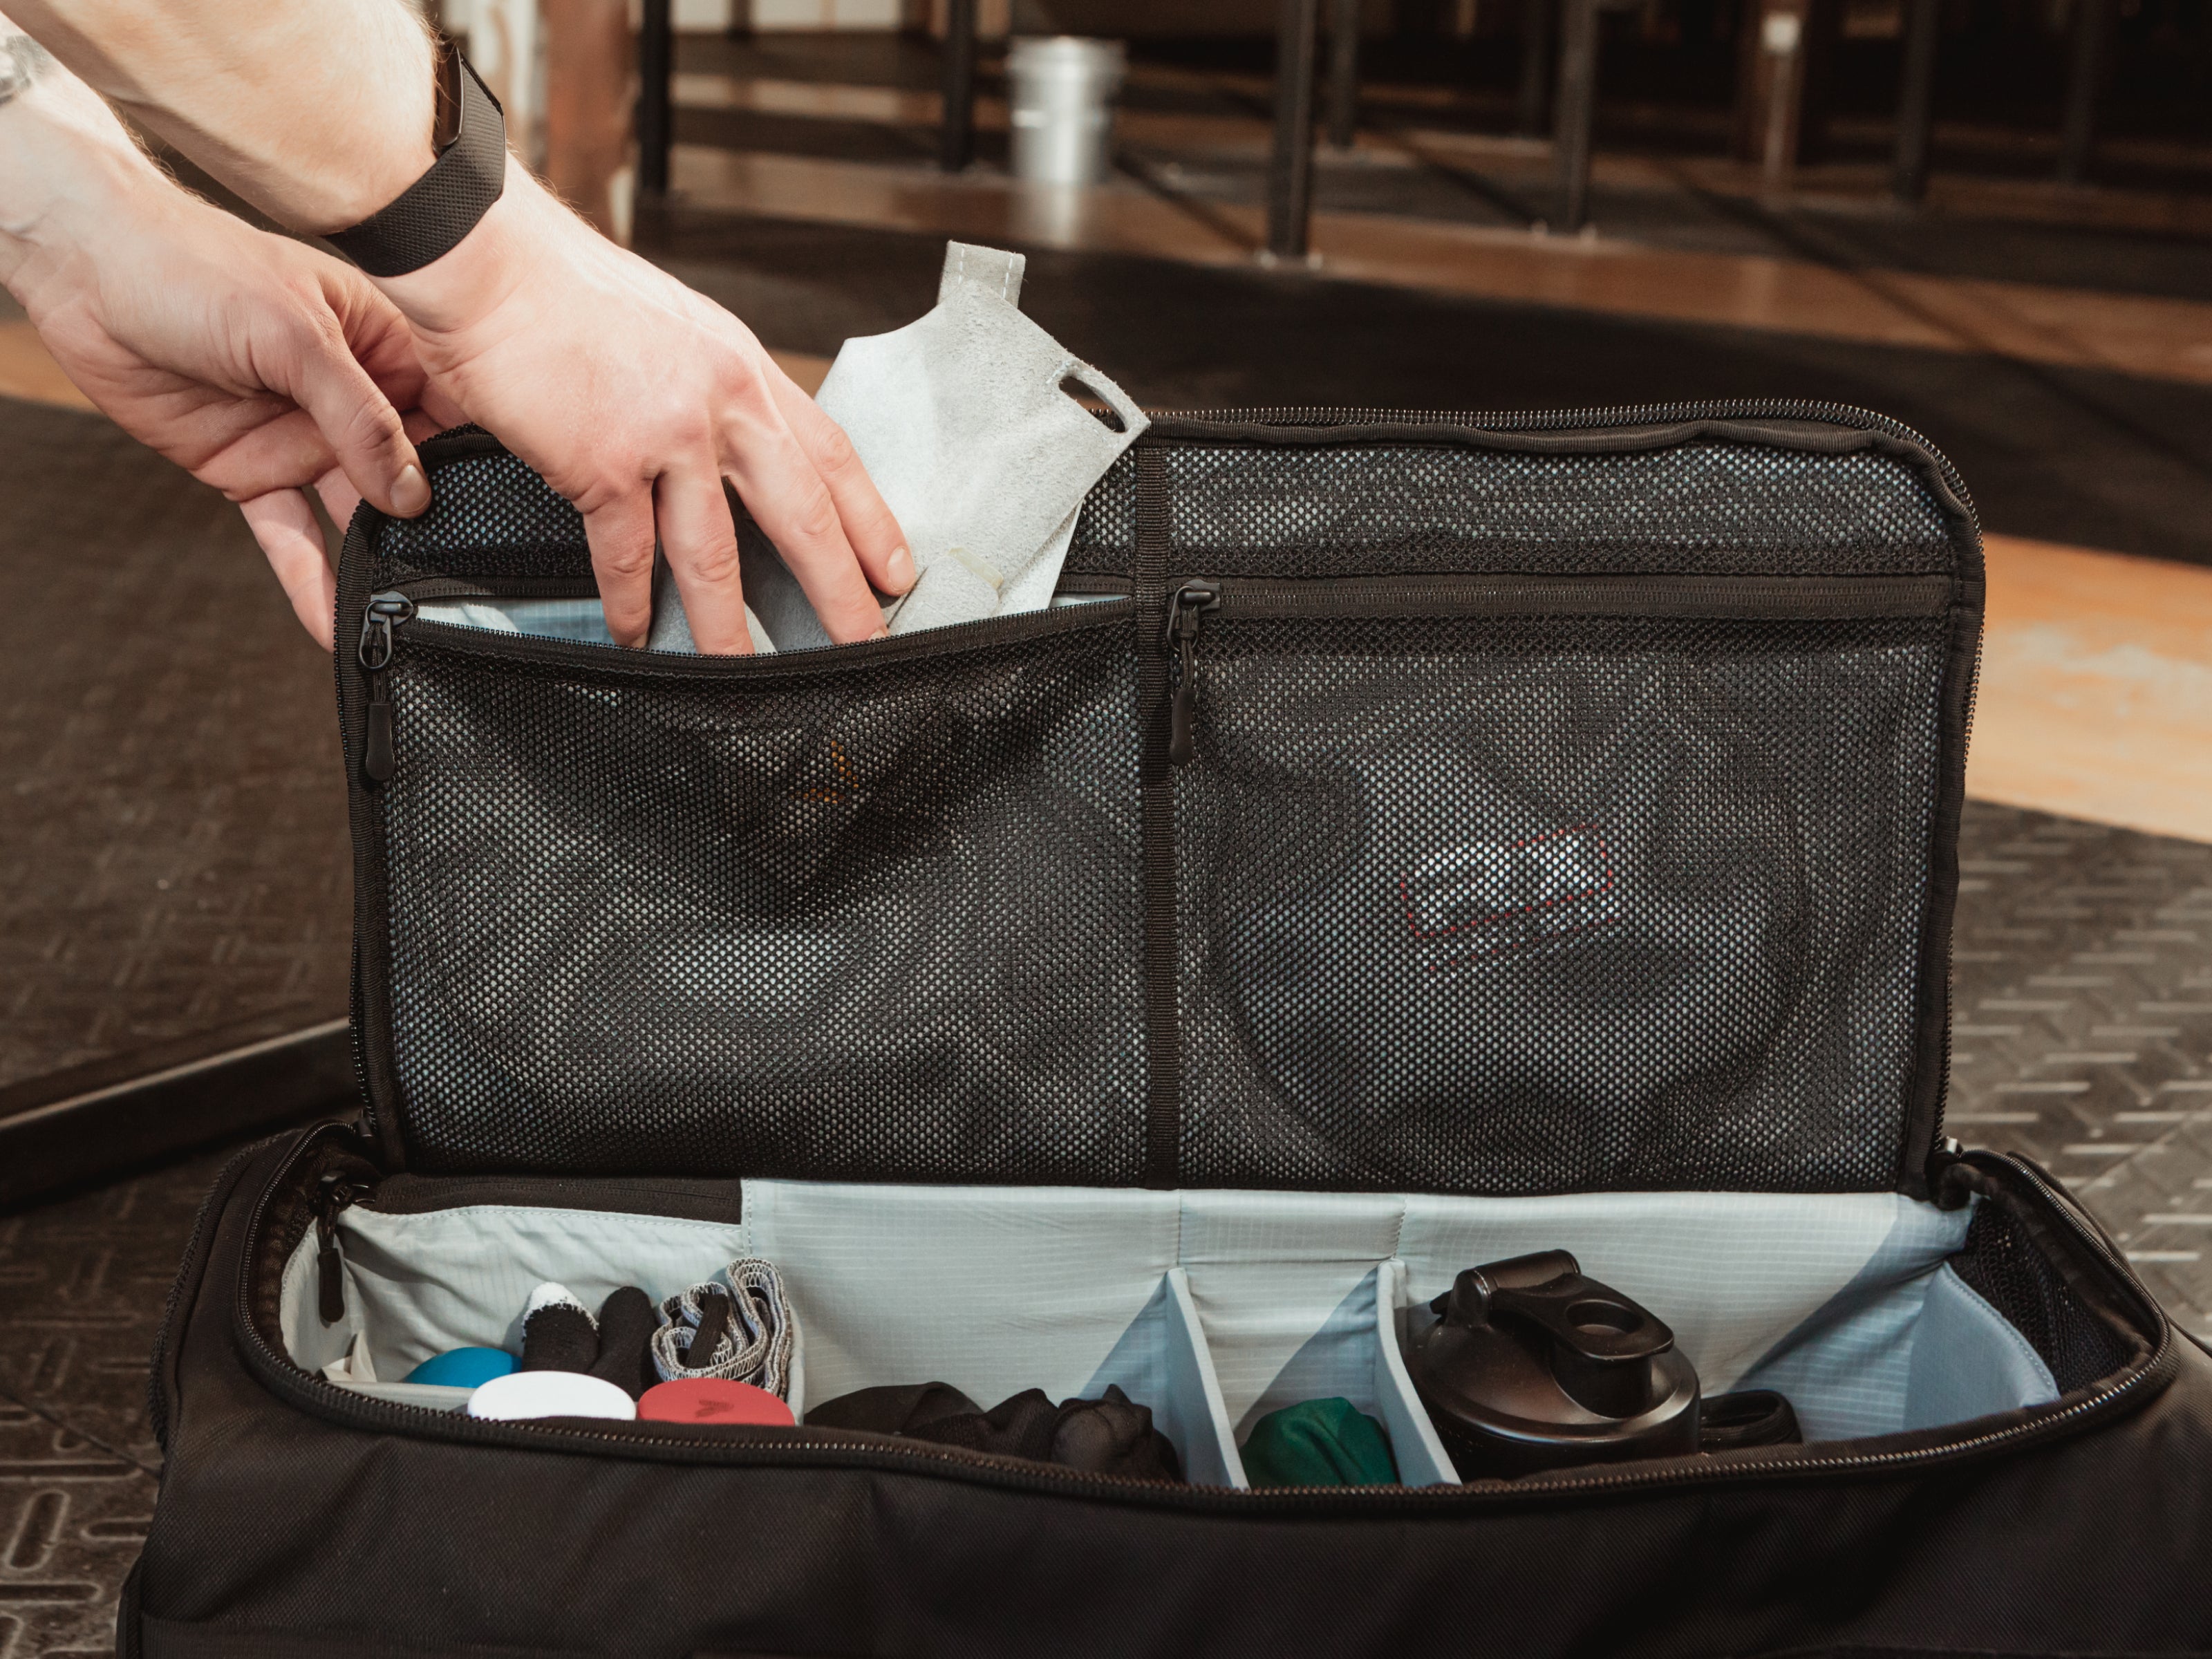 The Large Duffel - Organized Gym Bag | Haven Athletic